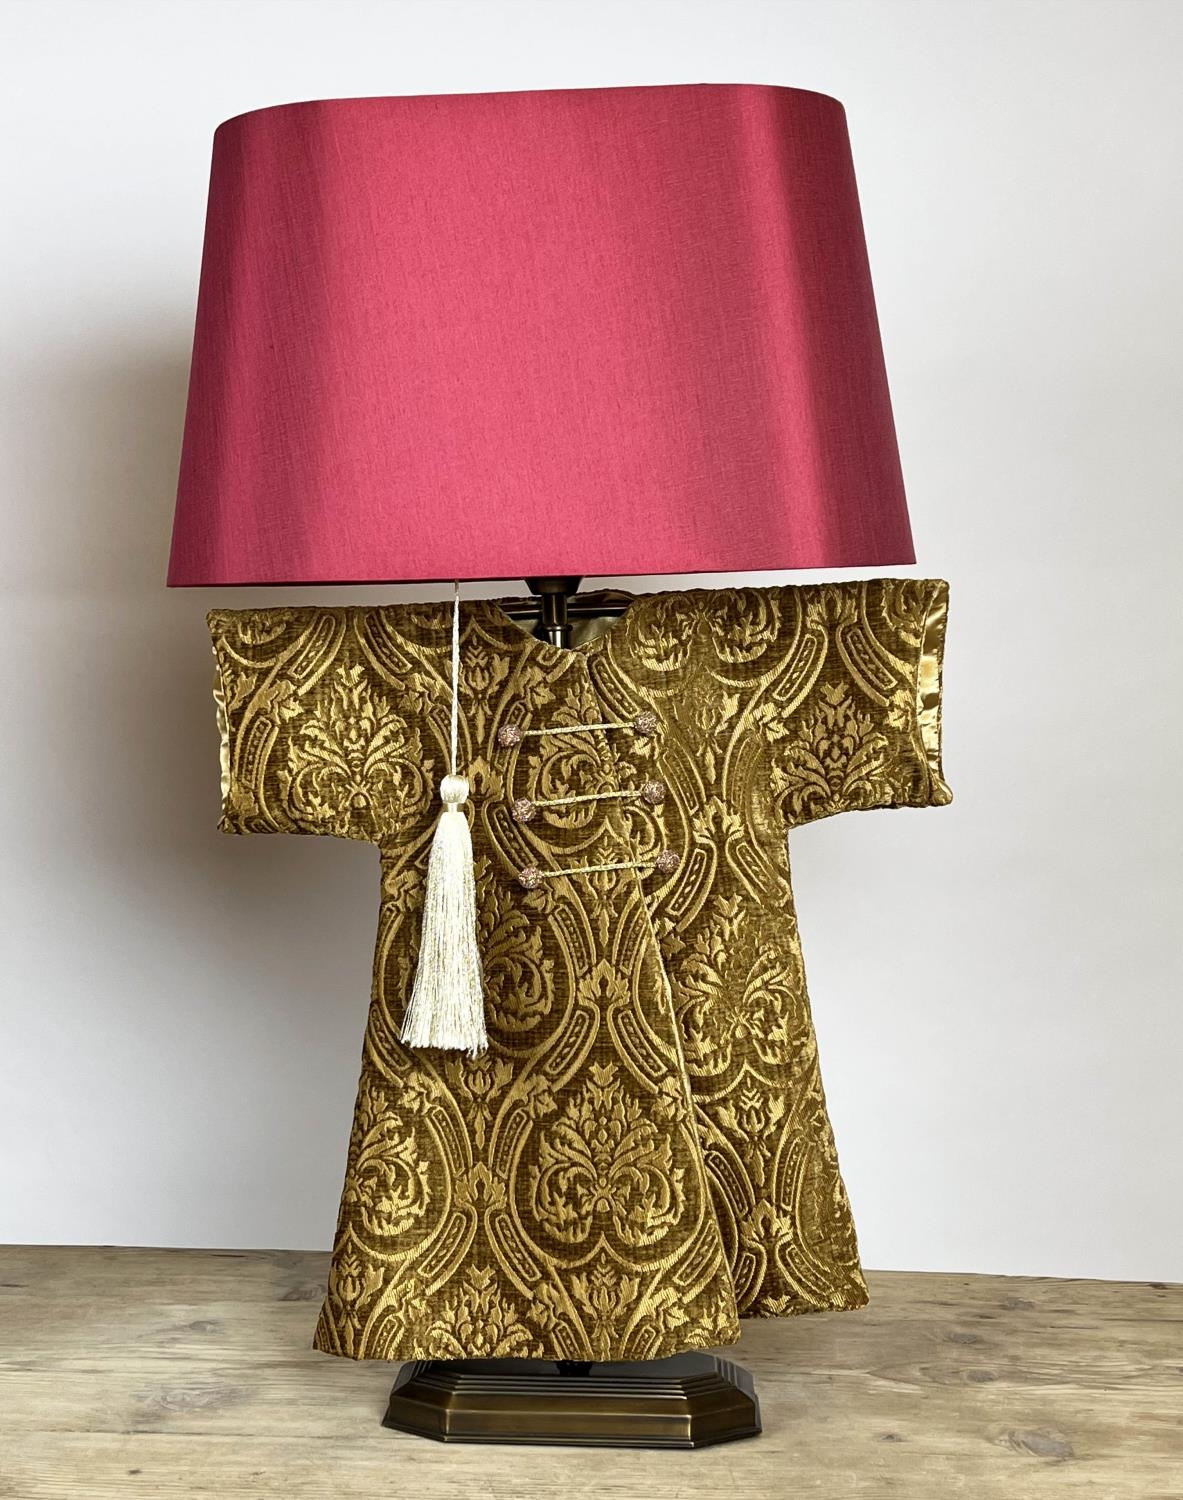 'KIMONO' TABLE LAMPS, a pair, with shades, 81cm H. (2) - Image 3 of 3